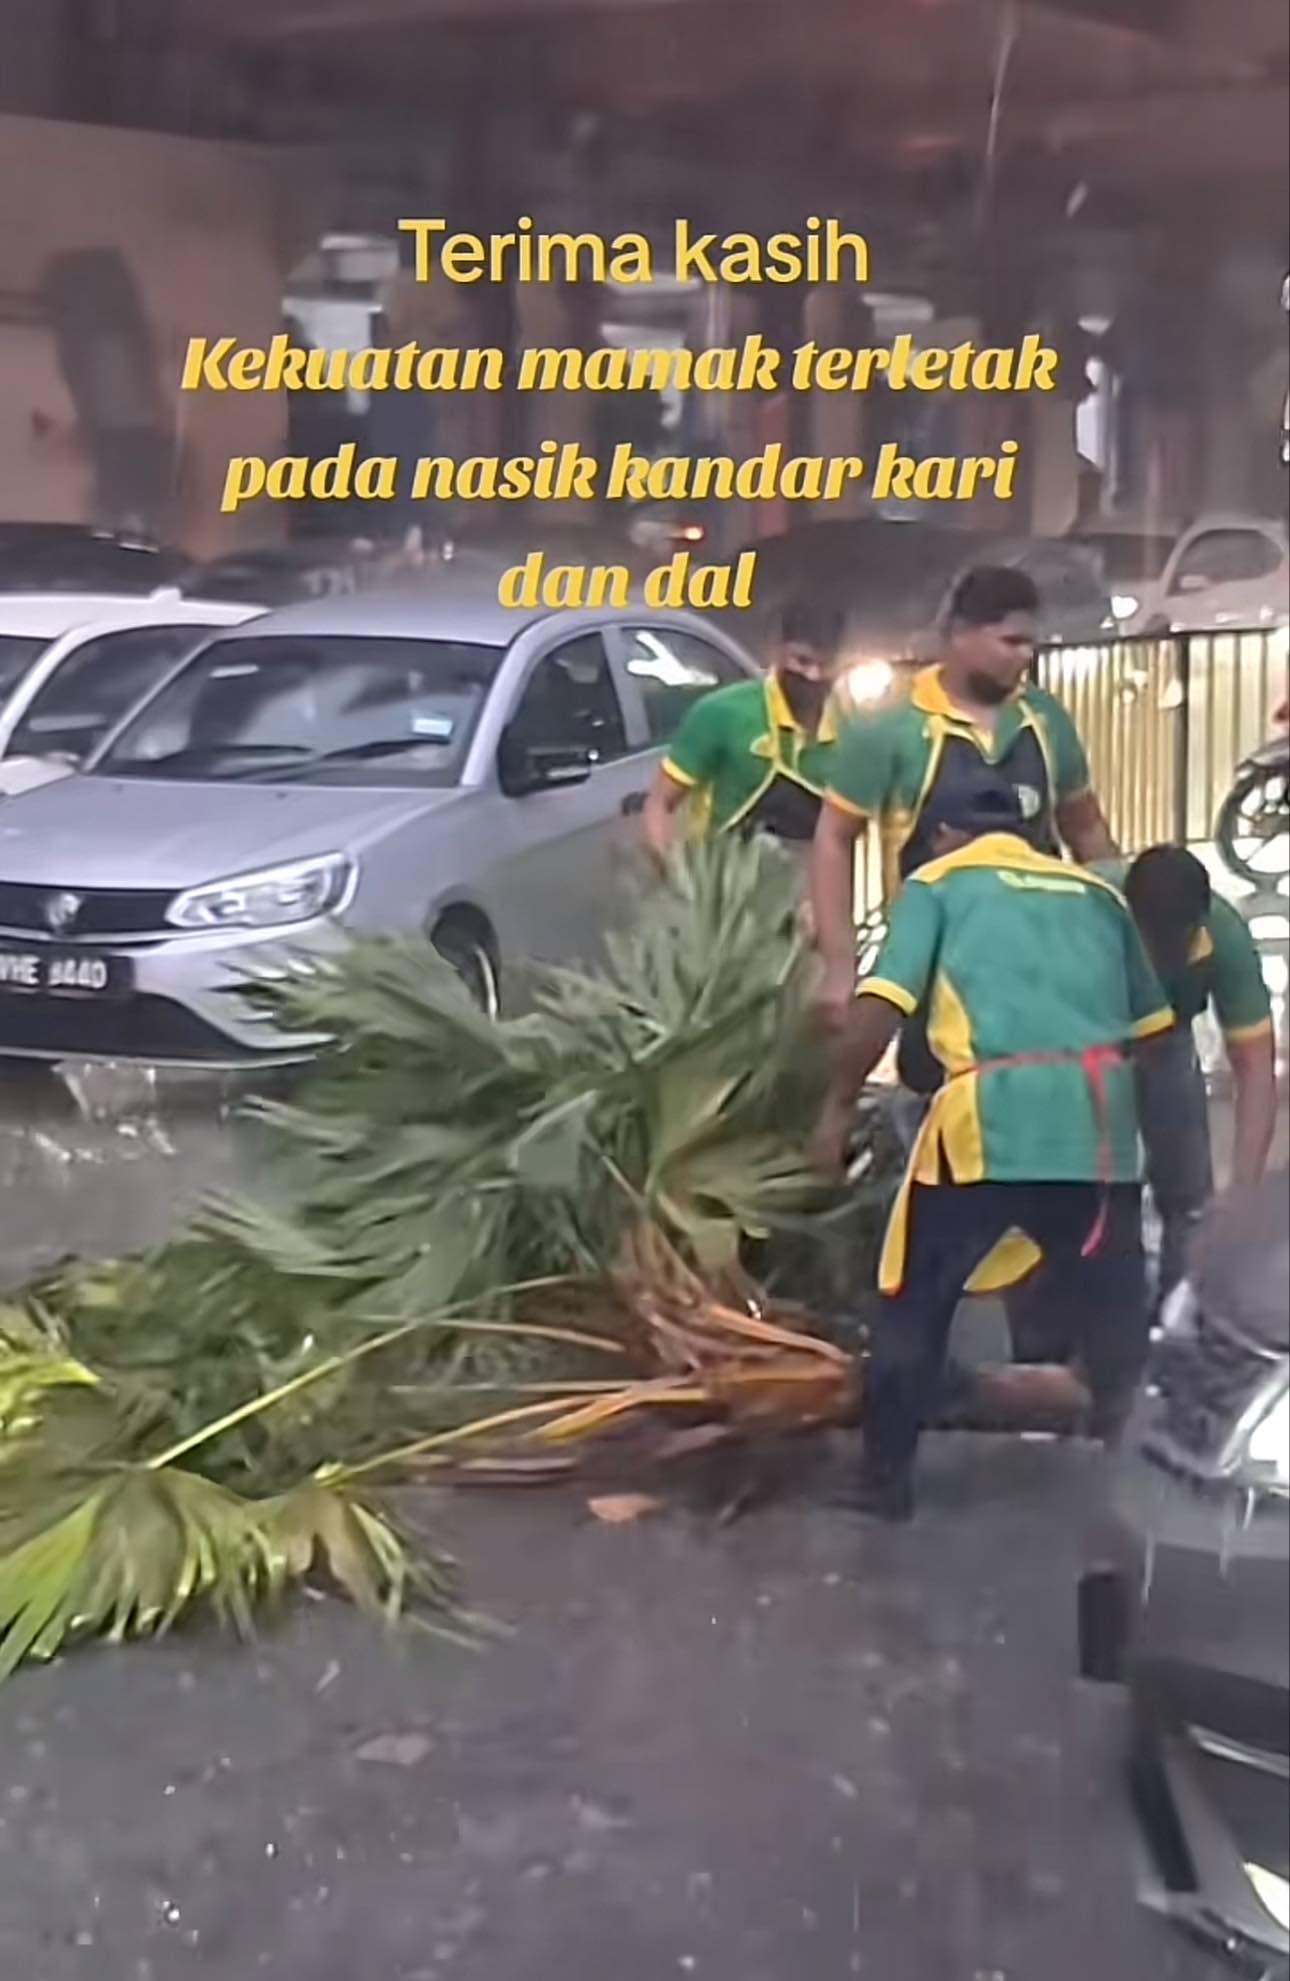 Nasi kandar workers removing the fallen tree off the road